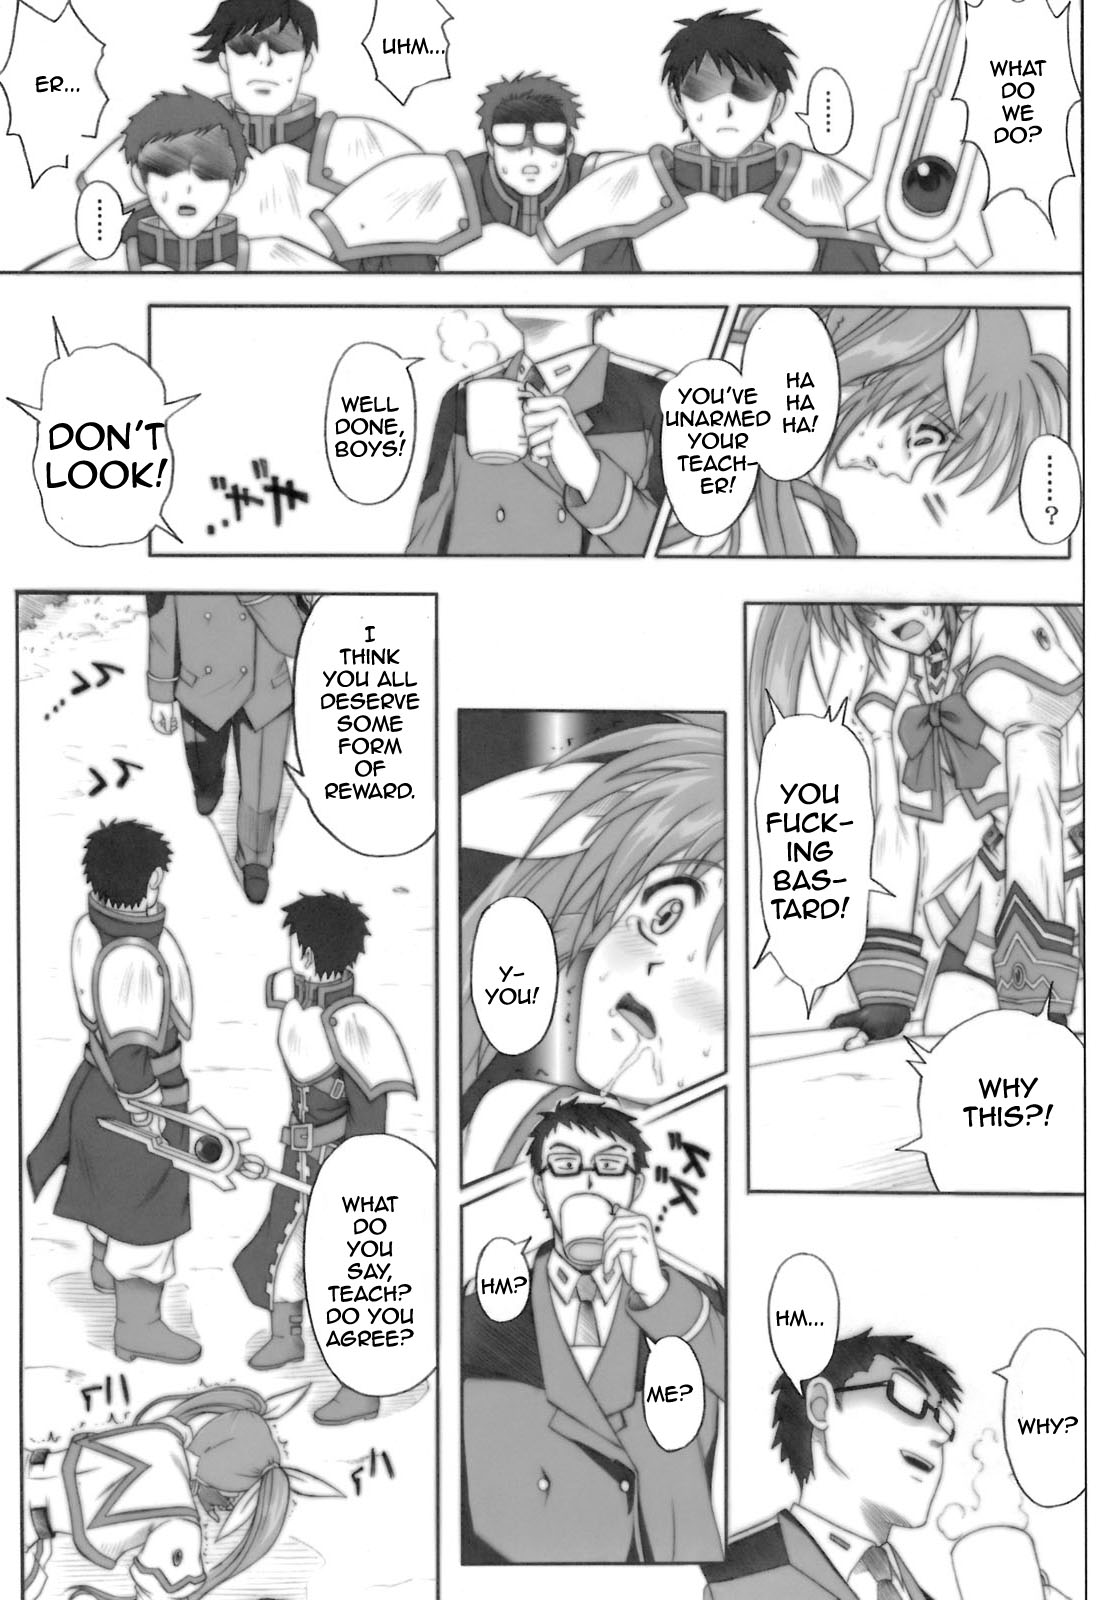 840 Color Classic Situation Note Extention (Mahou Shoujo Lyrical Nanoha) [English] [Rewrite] page 27 full